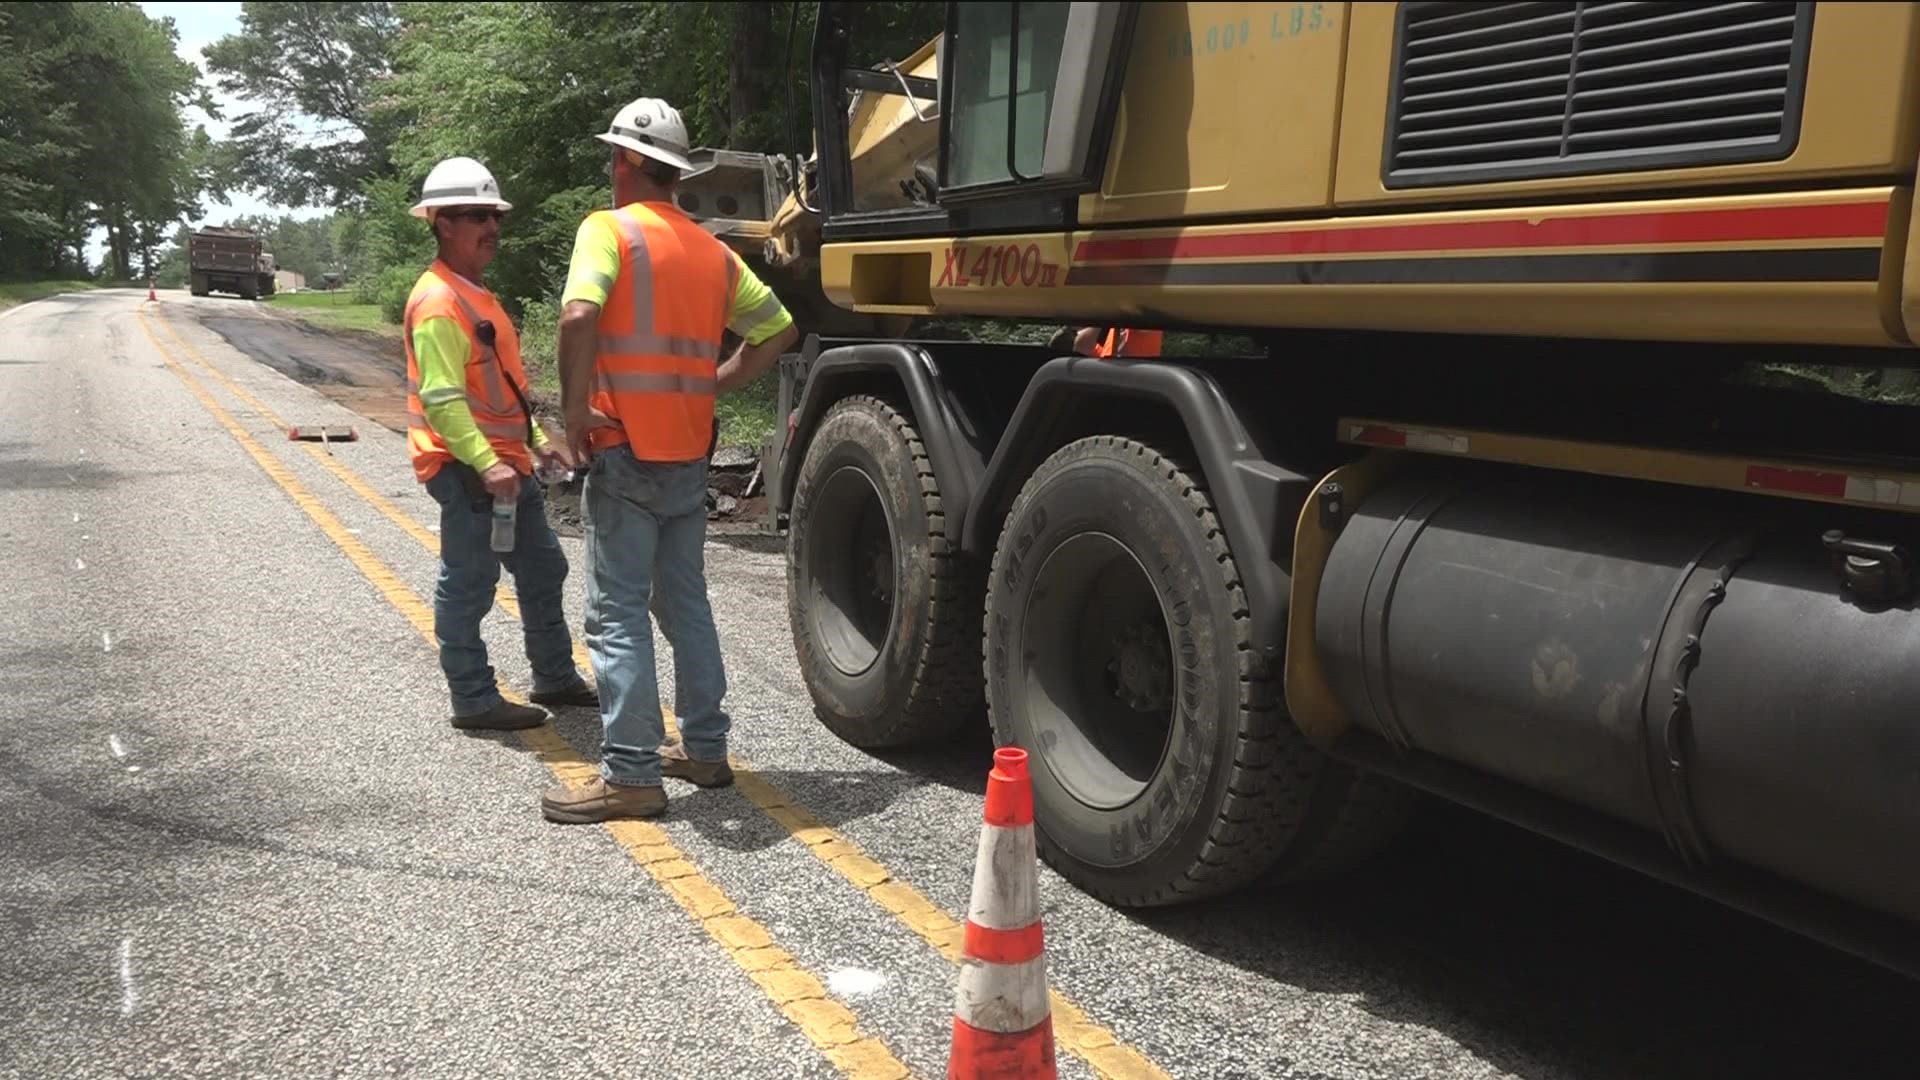 TxDOT workers keeping cool in the rising heat